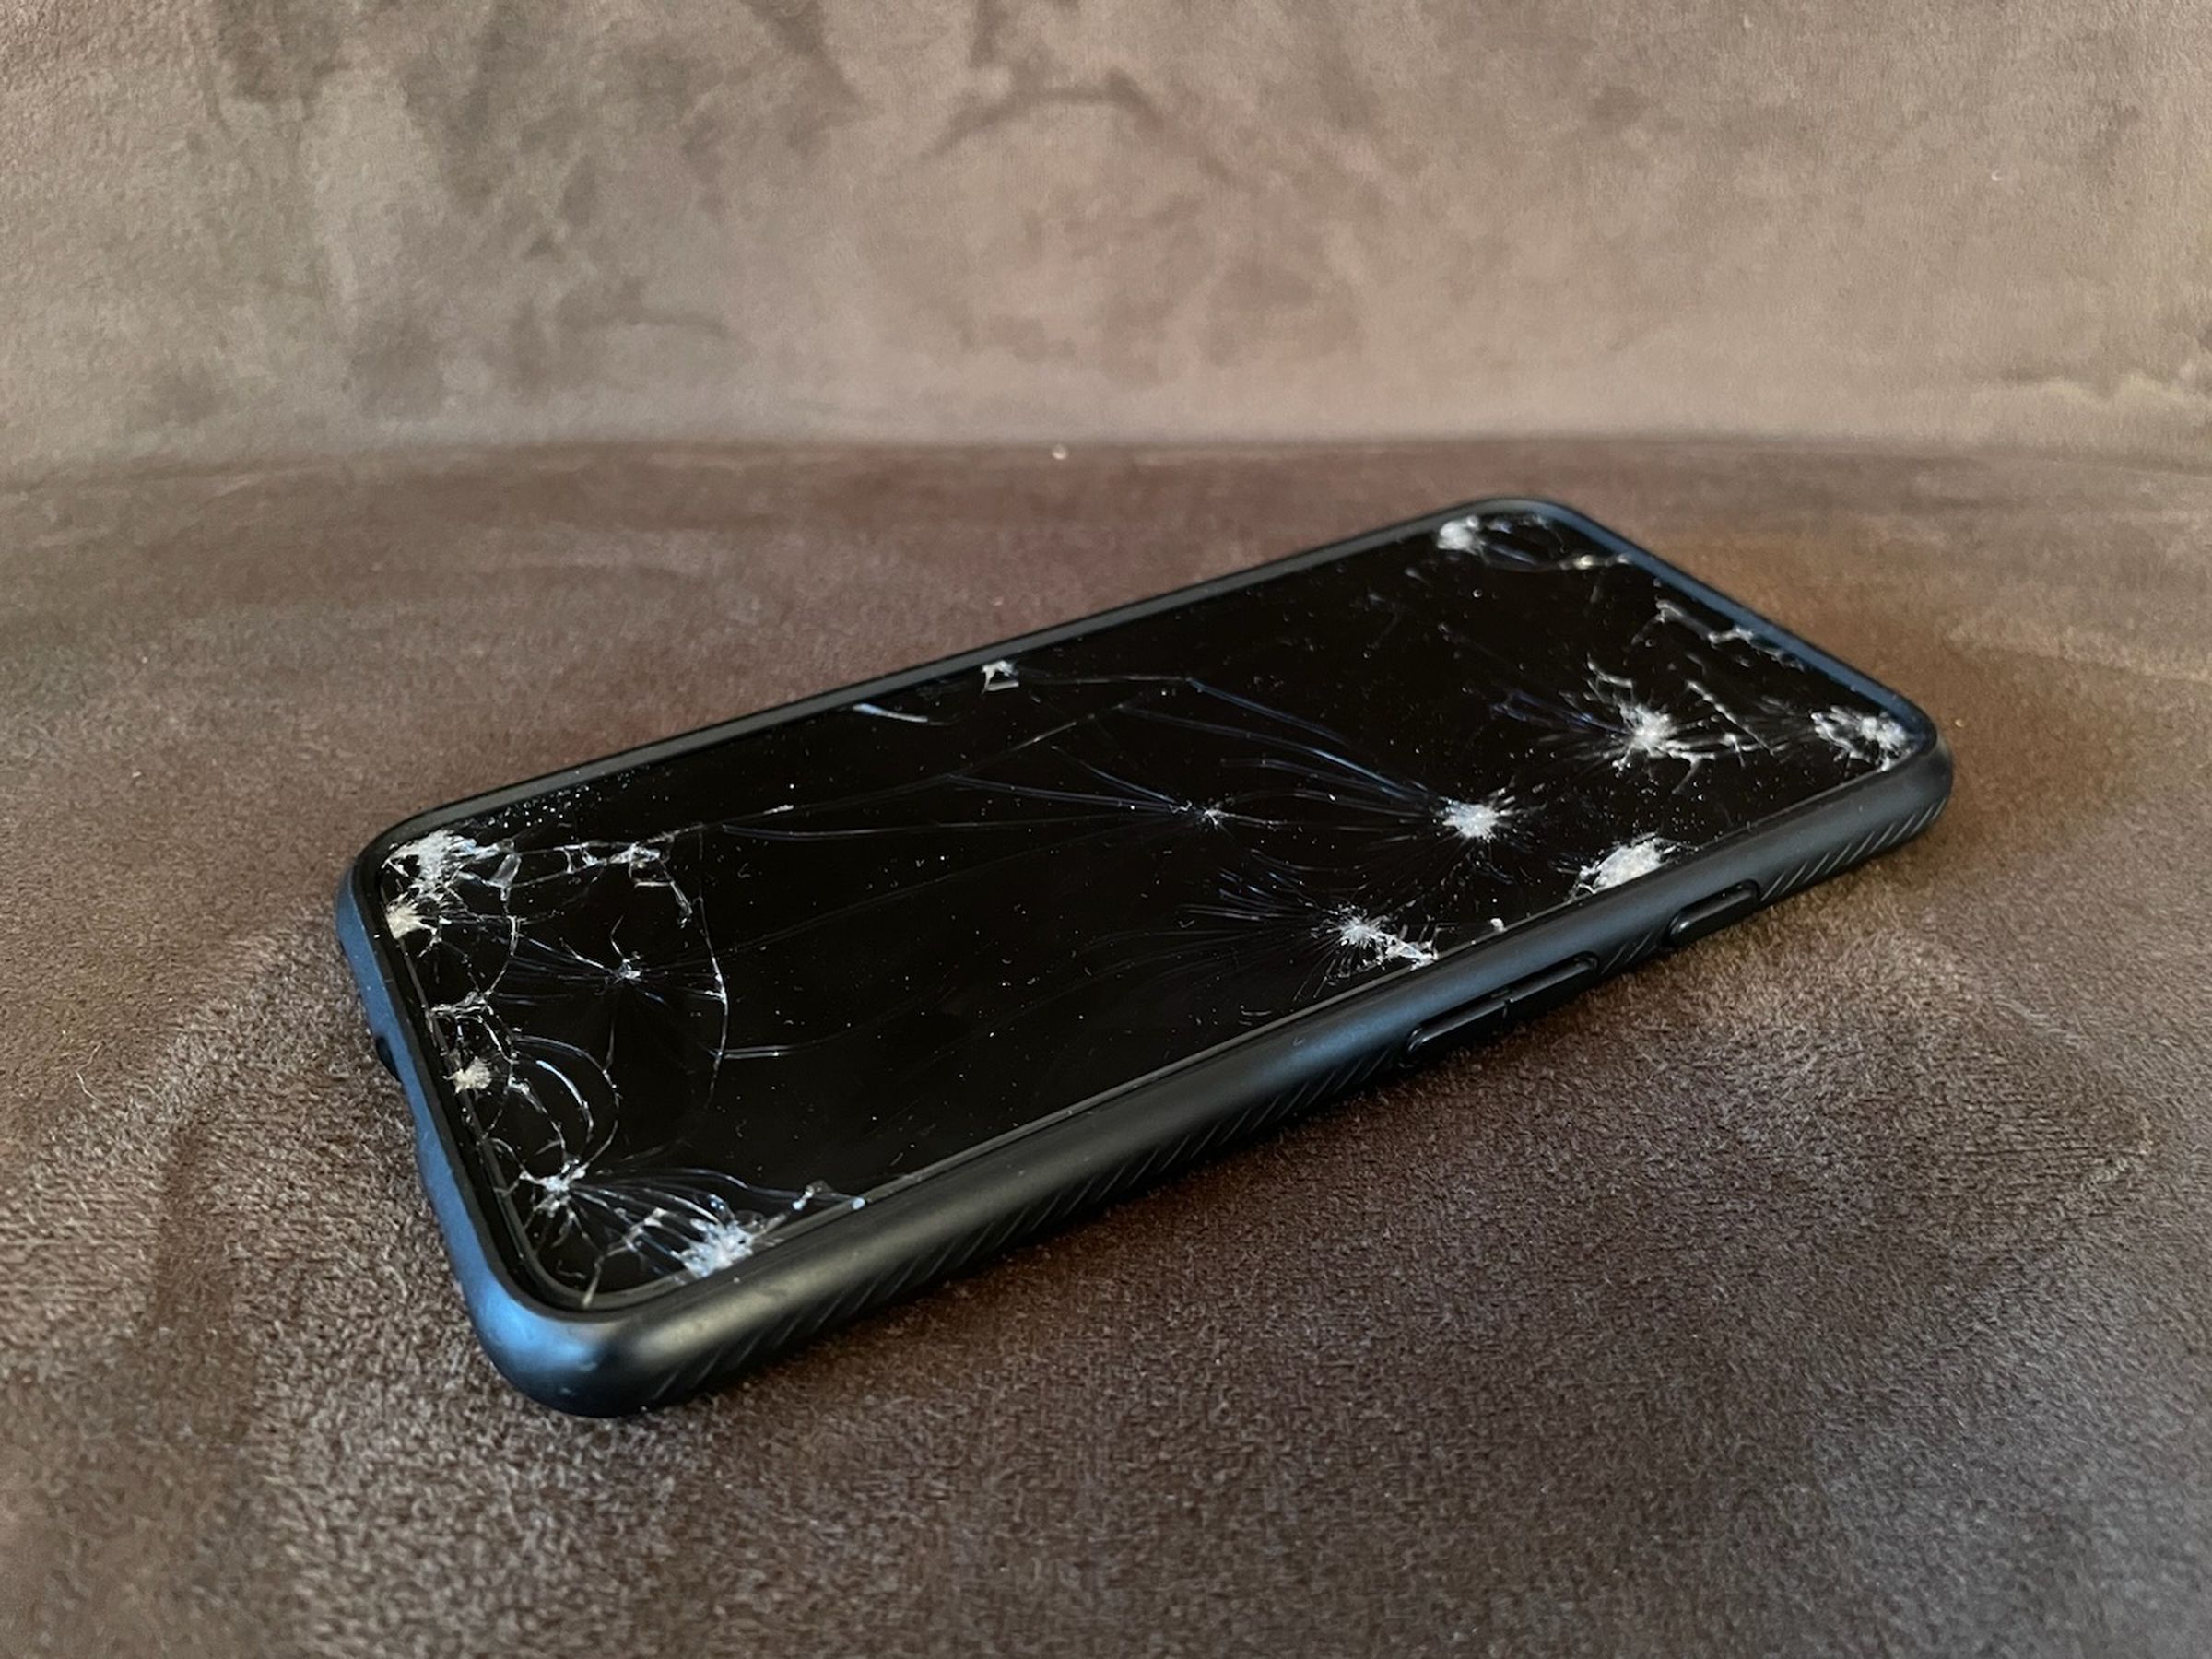 This Pixel 4 looks like it was annihilated by pebbles